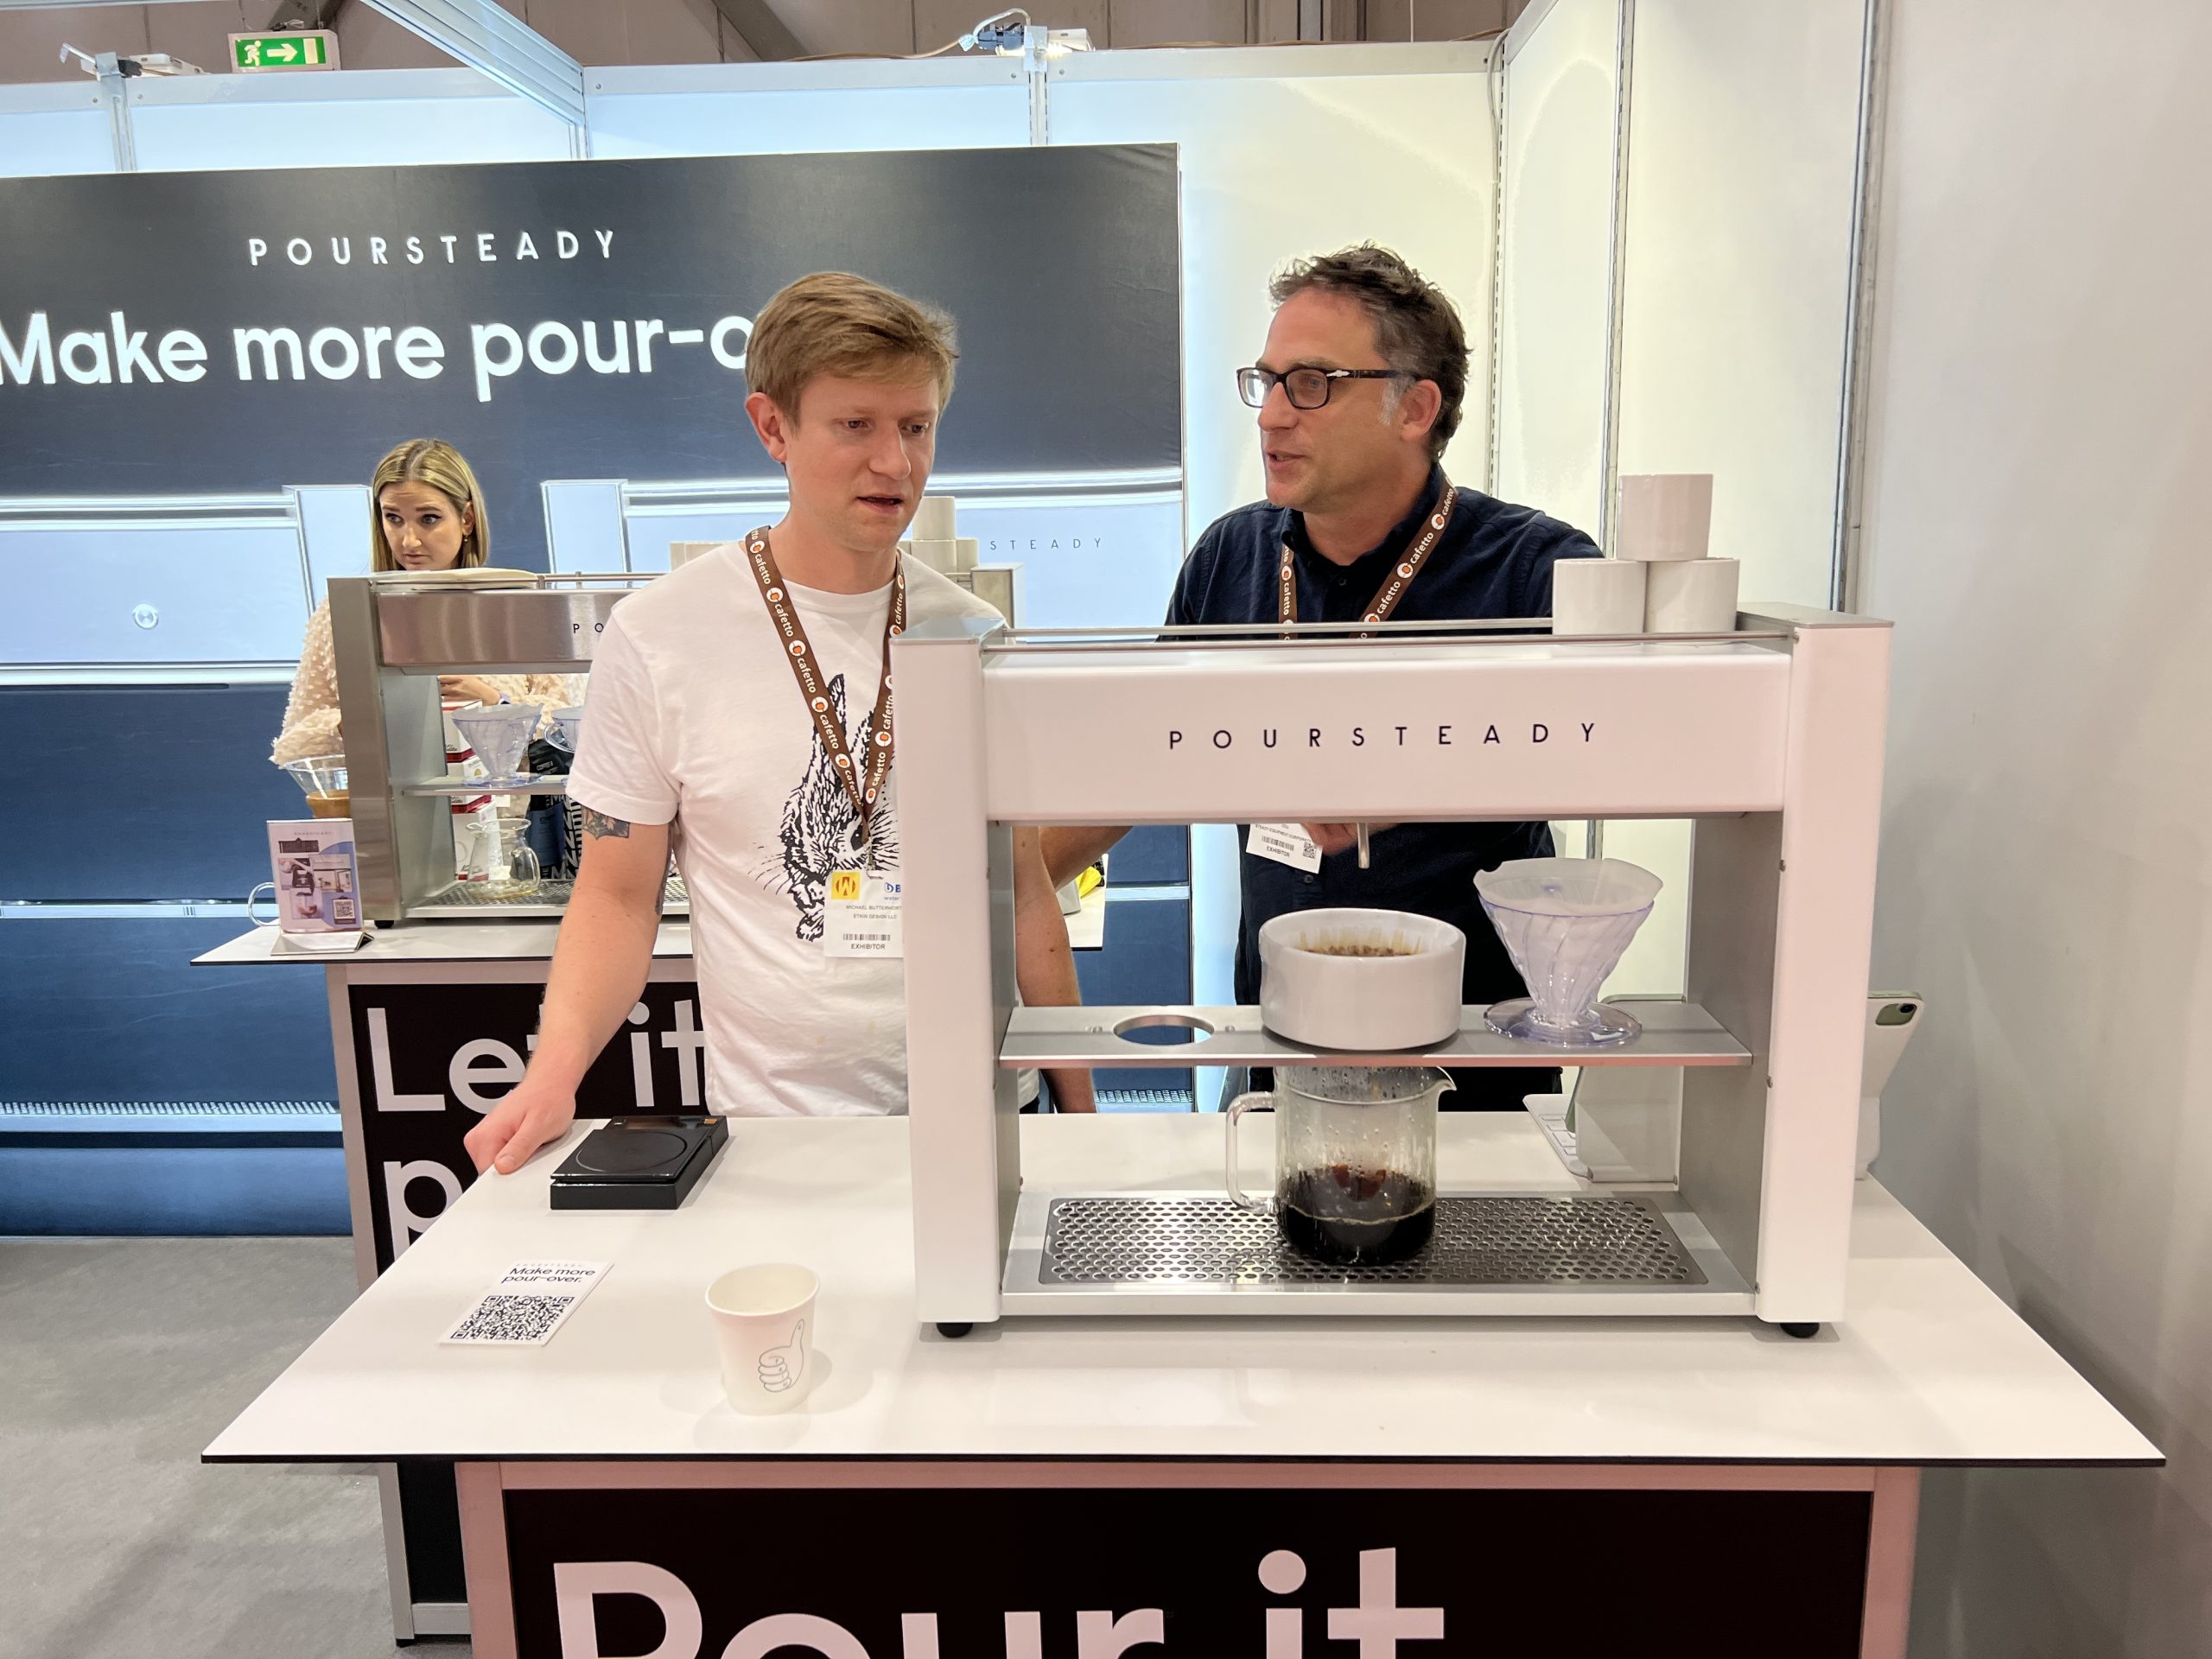 Building a Better Pour-over: a Conversation with Poursteady CEO Stephan von Muehlen